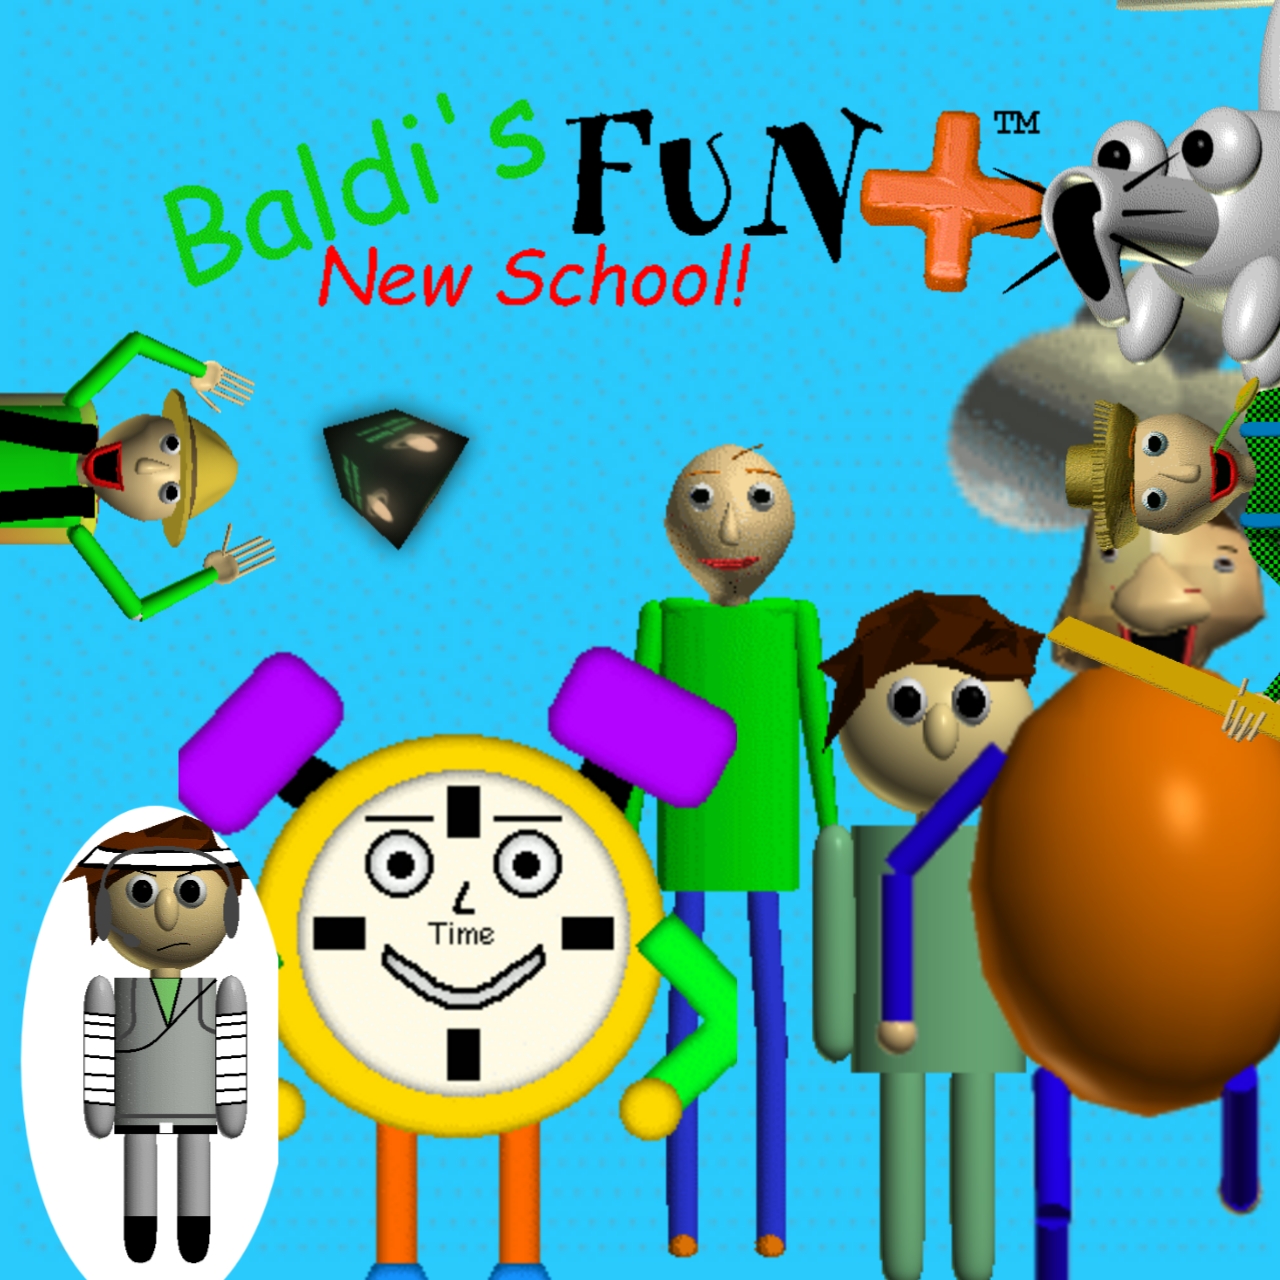 Baldi's Basics Android Mods And Games Collection by Johnster Space